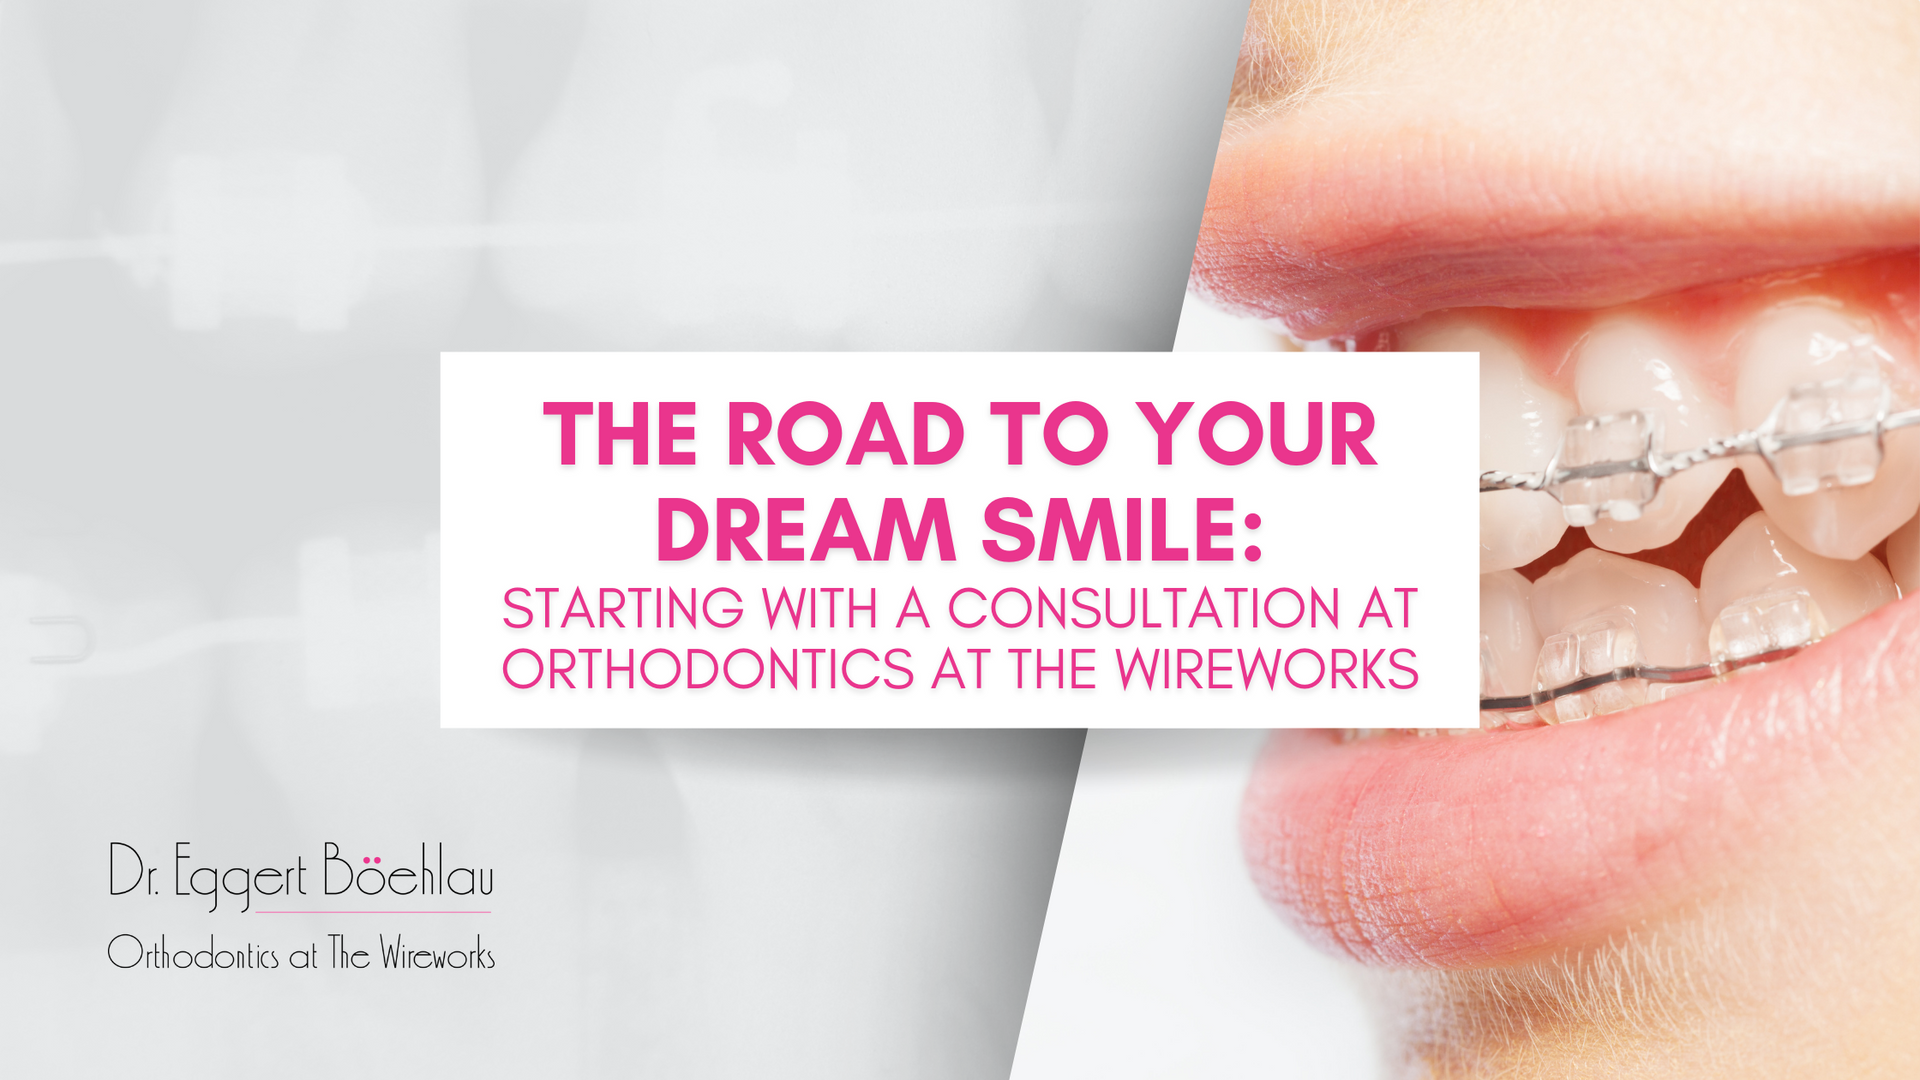 the road to your dream smile is starting with a consultation at orthodontics at the wireworks